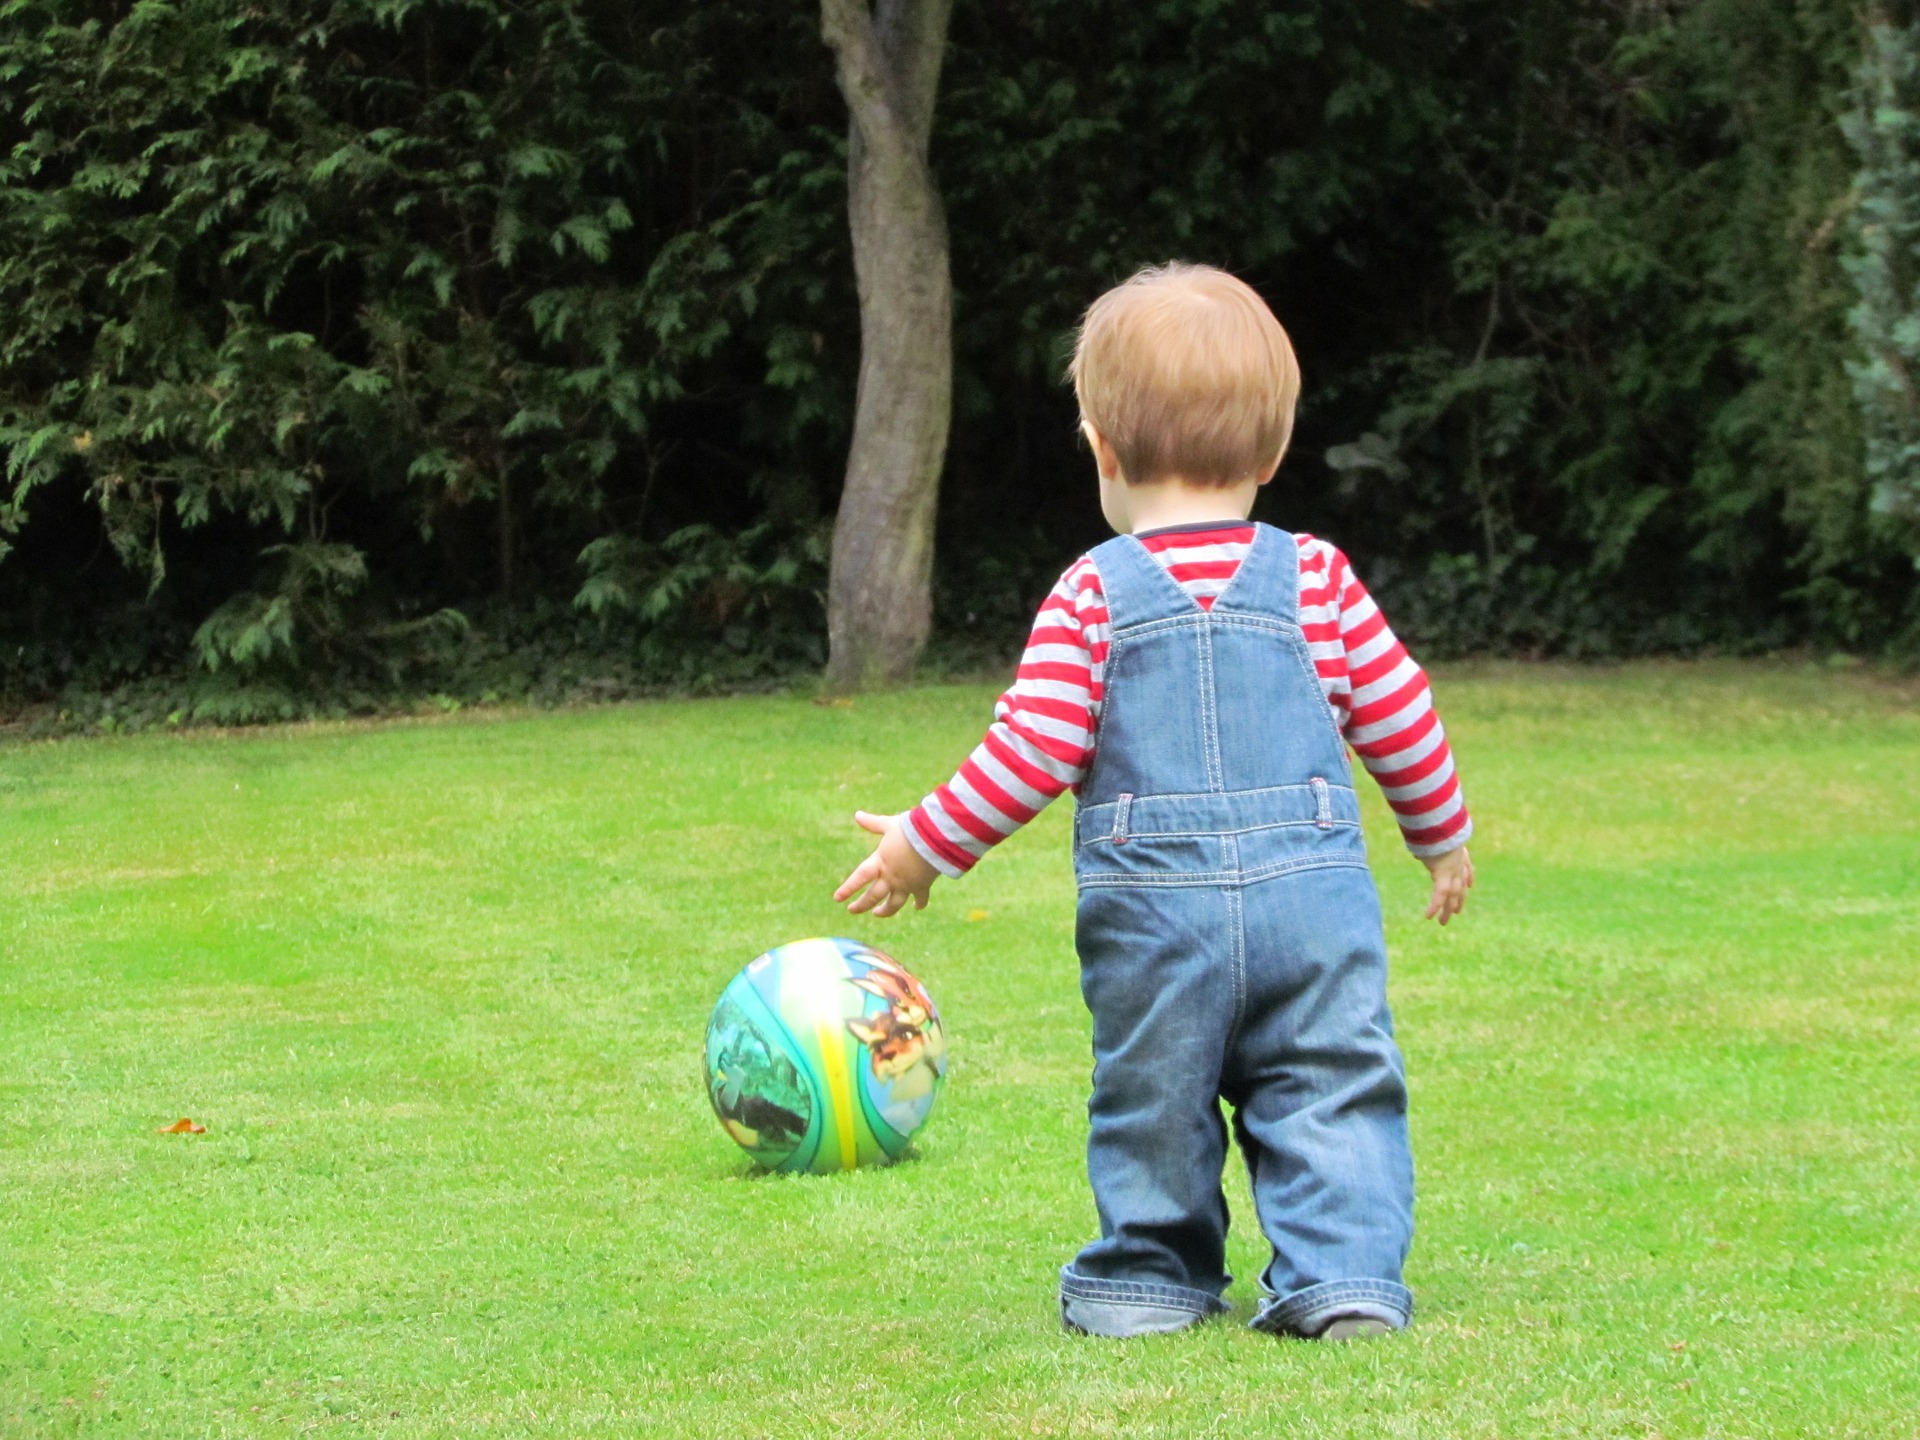 Toddler with football